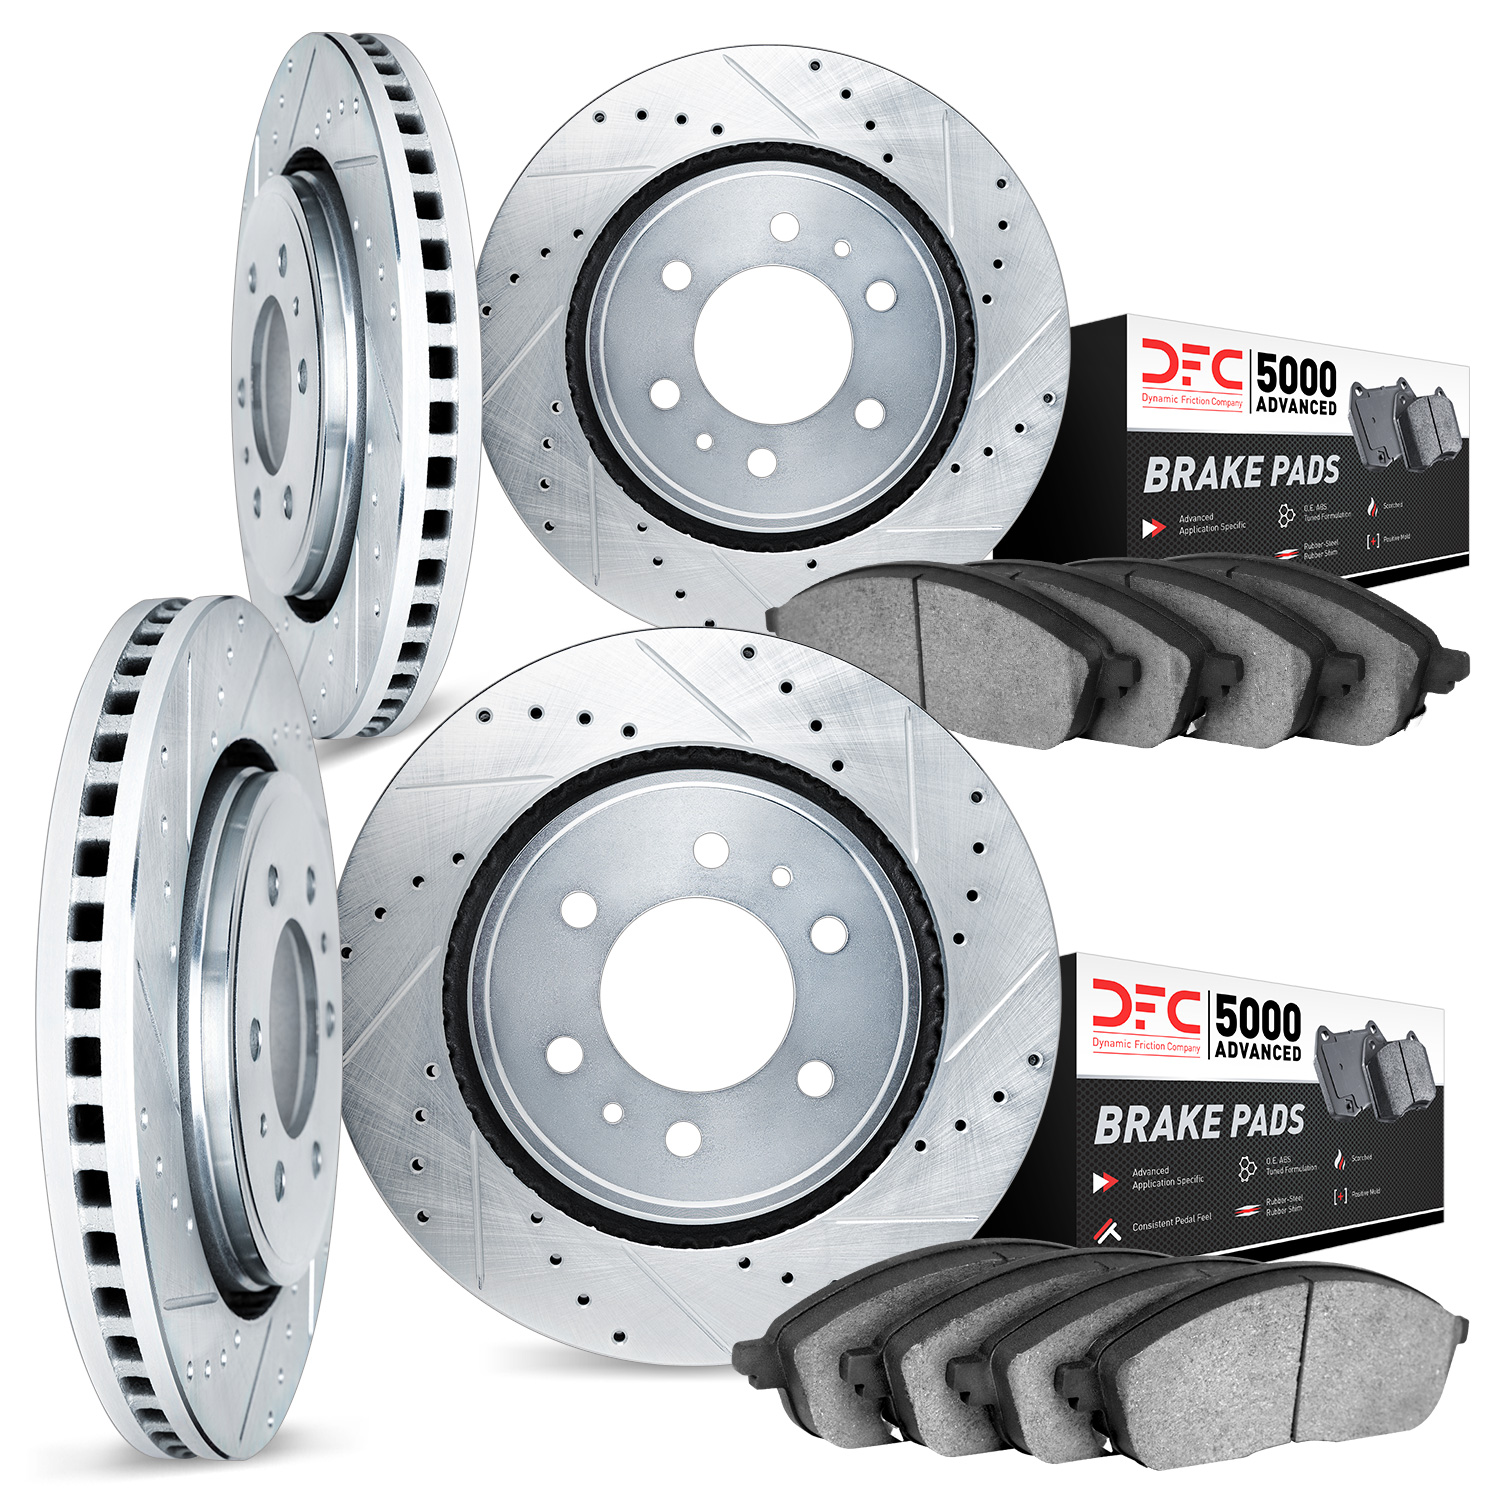 7504-48020 Drilled/Slotted Brake Rotors w/5000 Advanced Brake Pads Kit [Silver], 2000-2006 GM, Position: Front and Rear